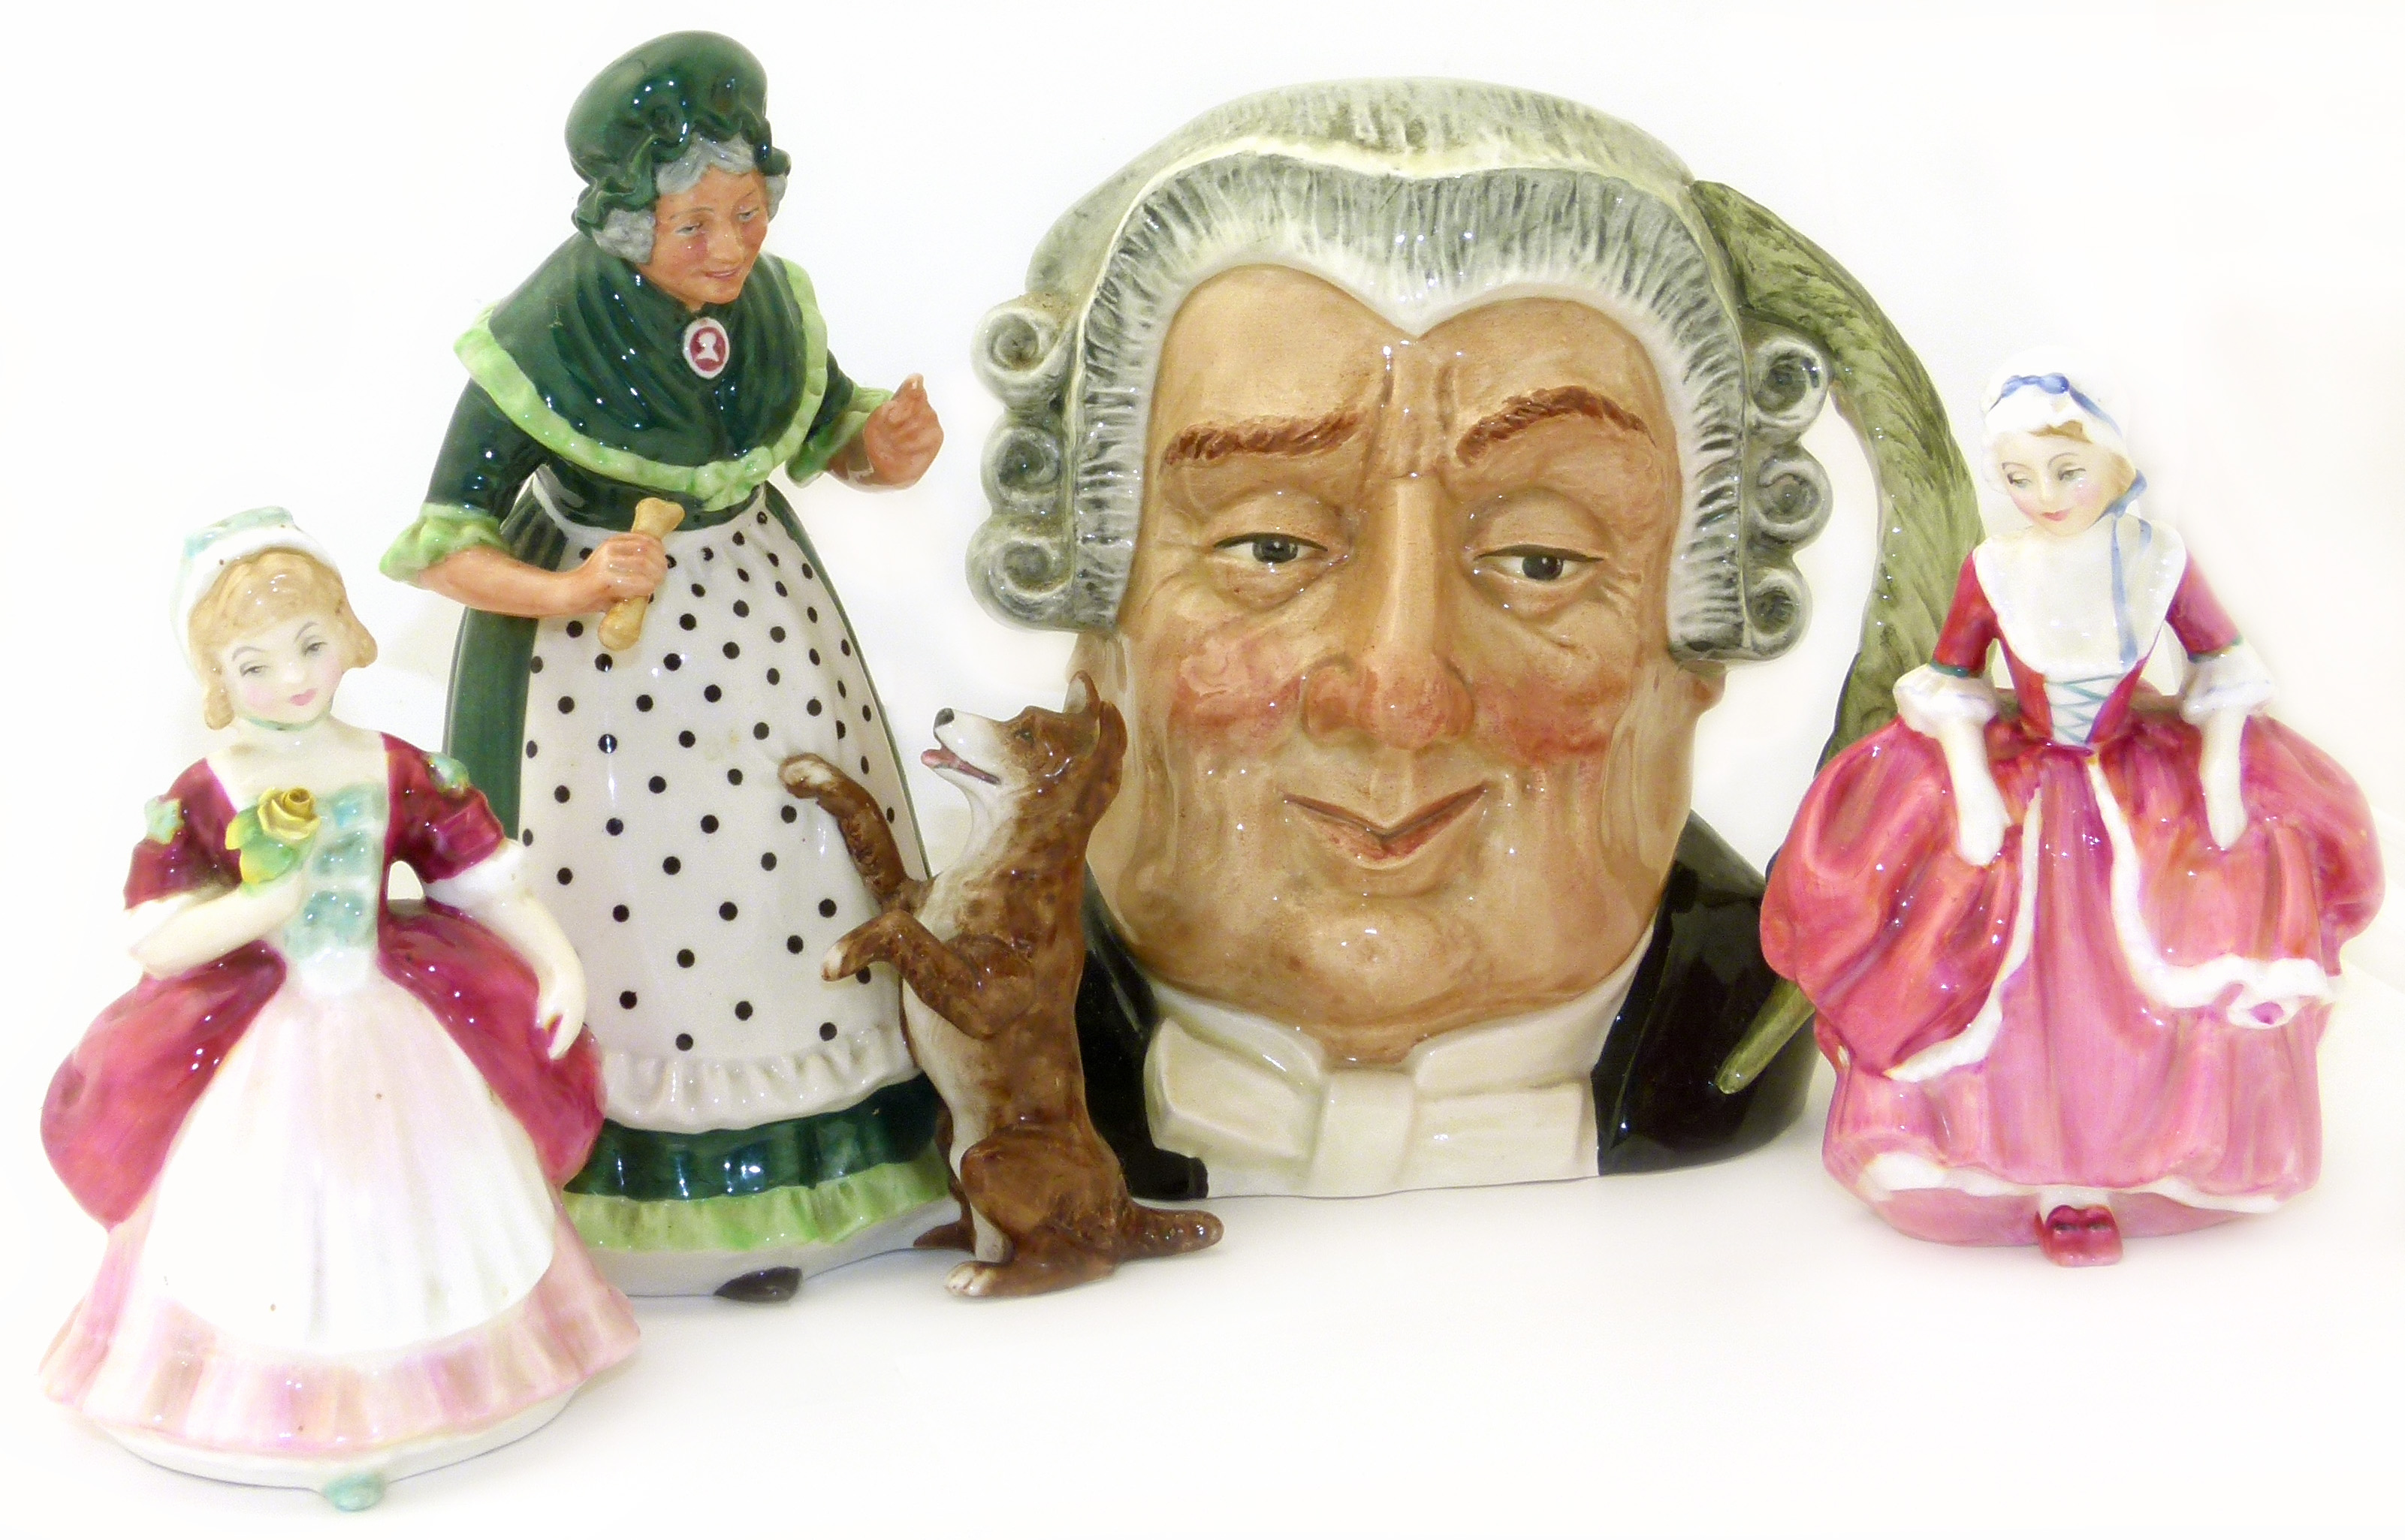 Royal Doulton "Old Mother Hubbard", "Valerie", "Lawyer" and "Goody". Condition reports are not